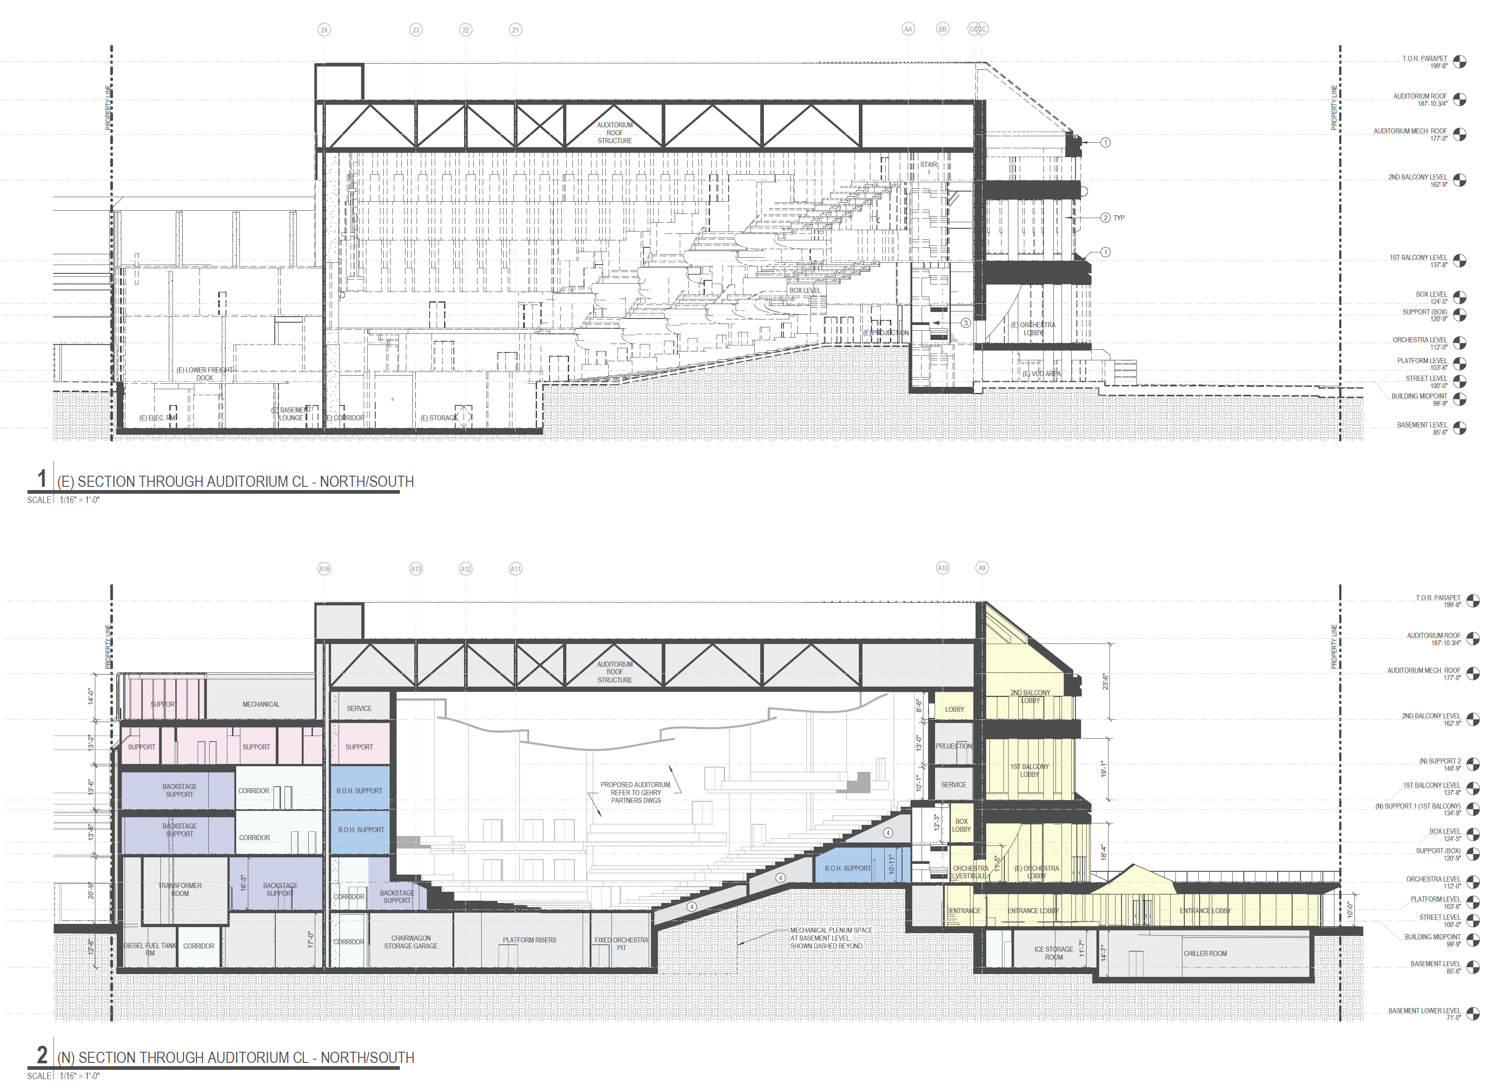 San Francisco Symphony Hall existing (top) and proposed changes (bottom) for the interior concert hall, cross-section illustration by Cavagnero and Gehry